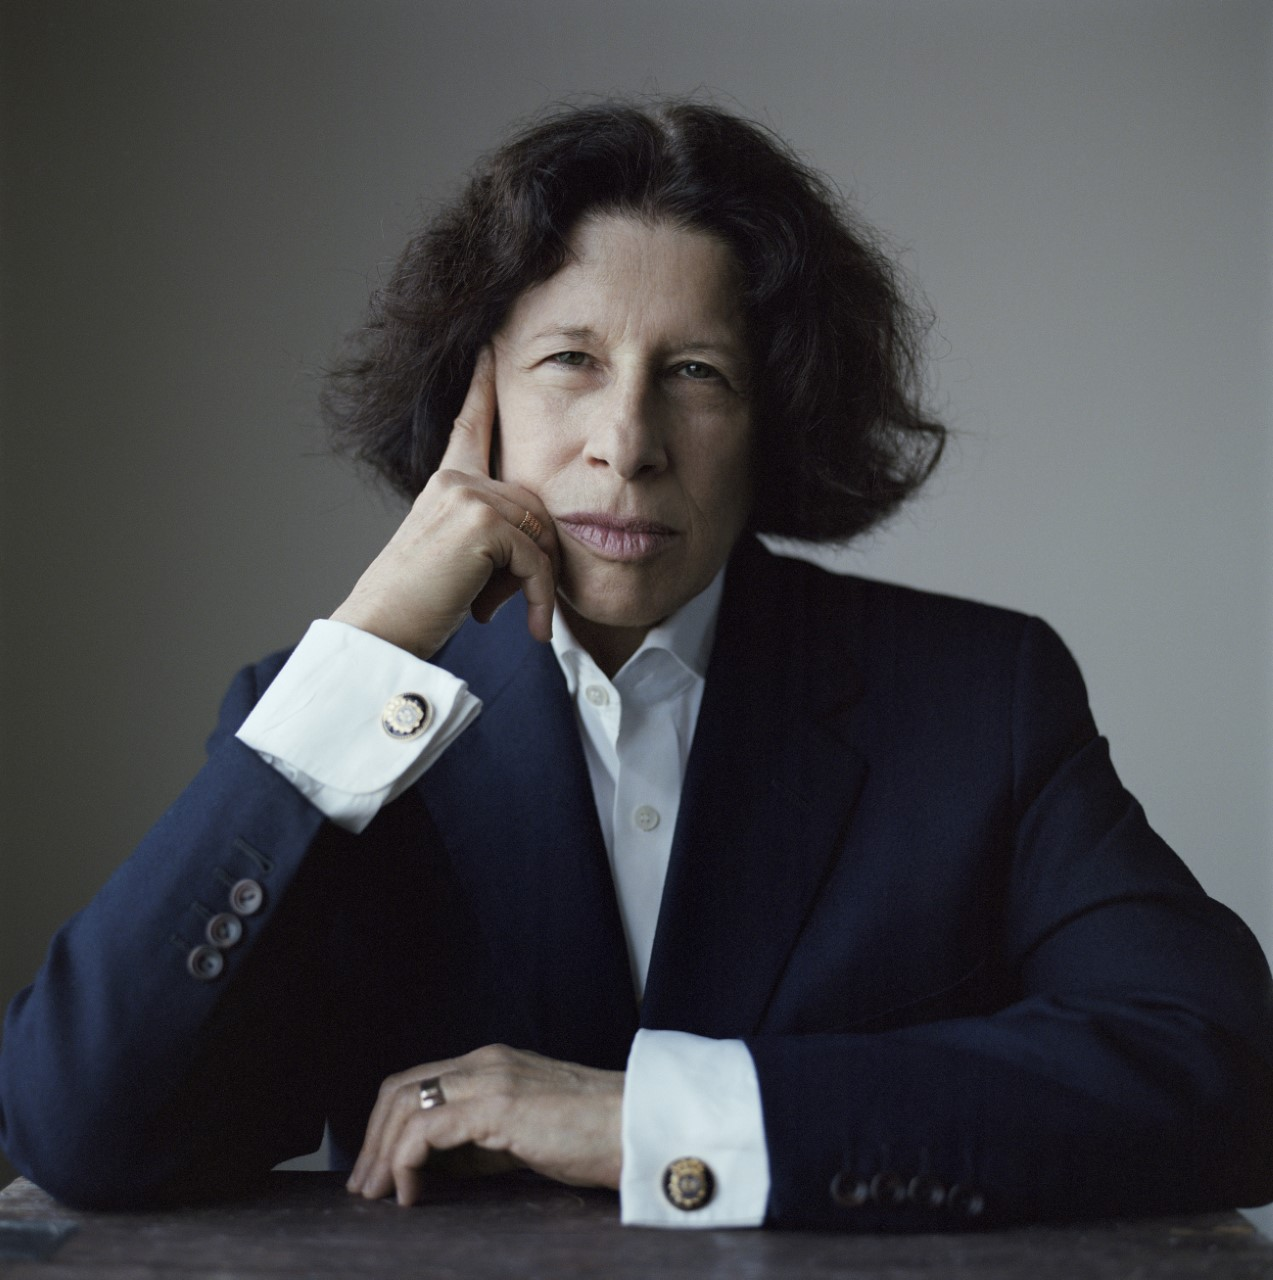 An Evening with Fran Lebowitz promo